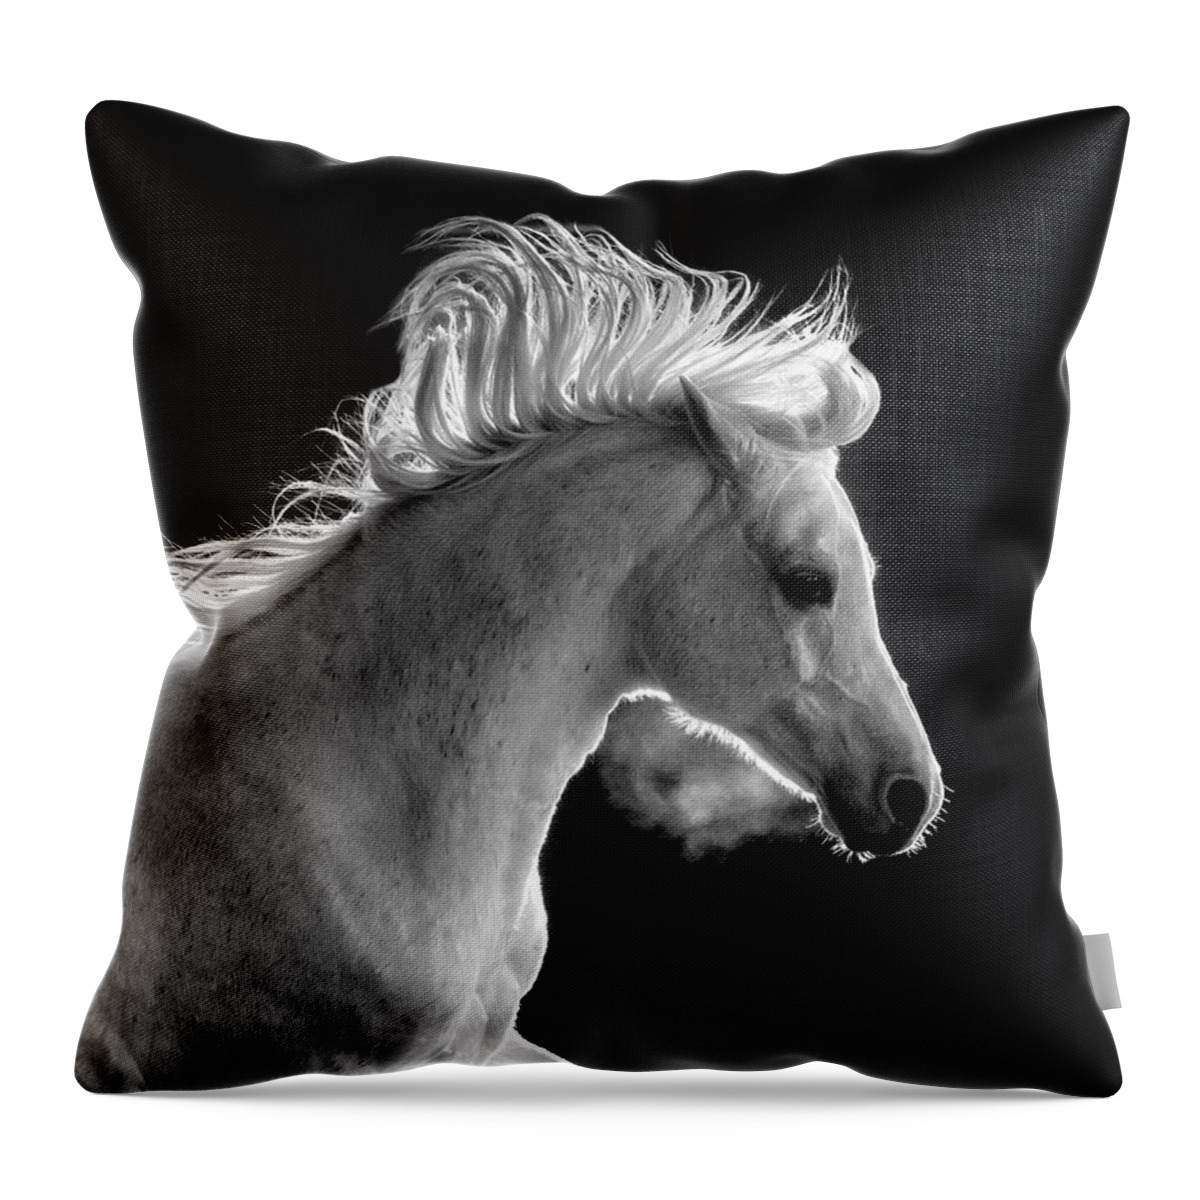 Backlit Arabian Throw Pillow featuring the photograph Backlit Arabian by Wes and Dotty Weber